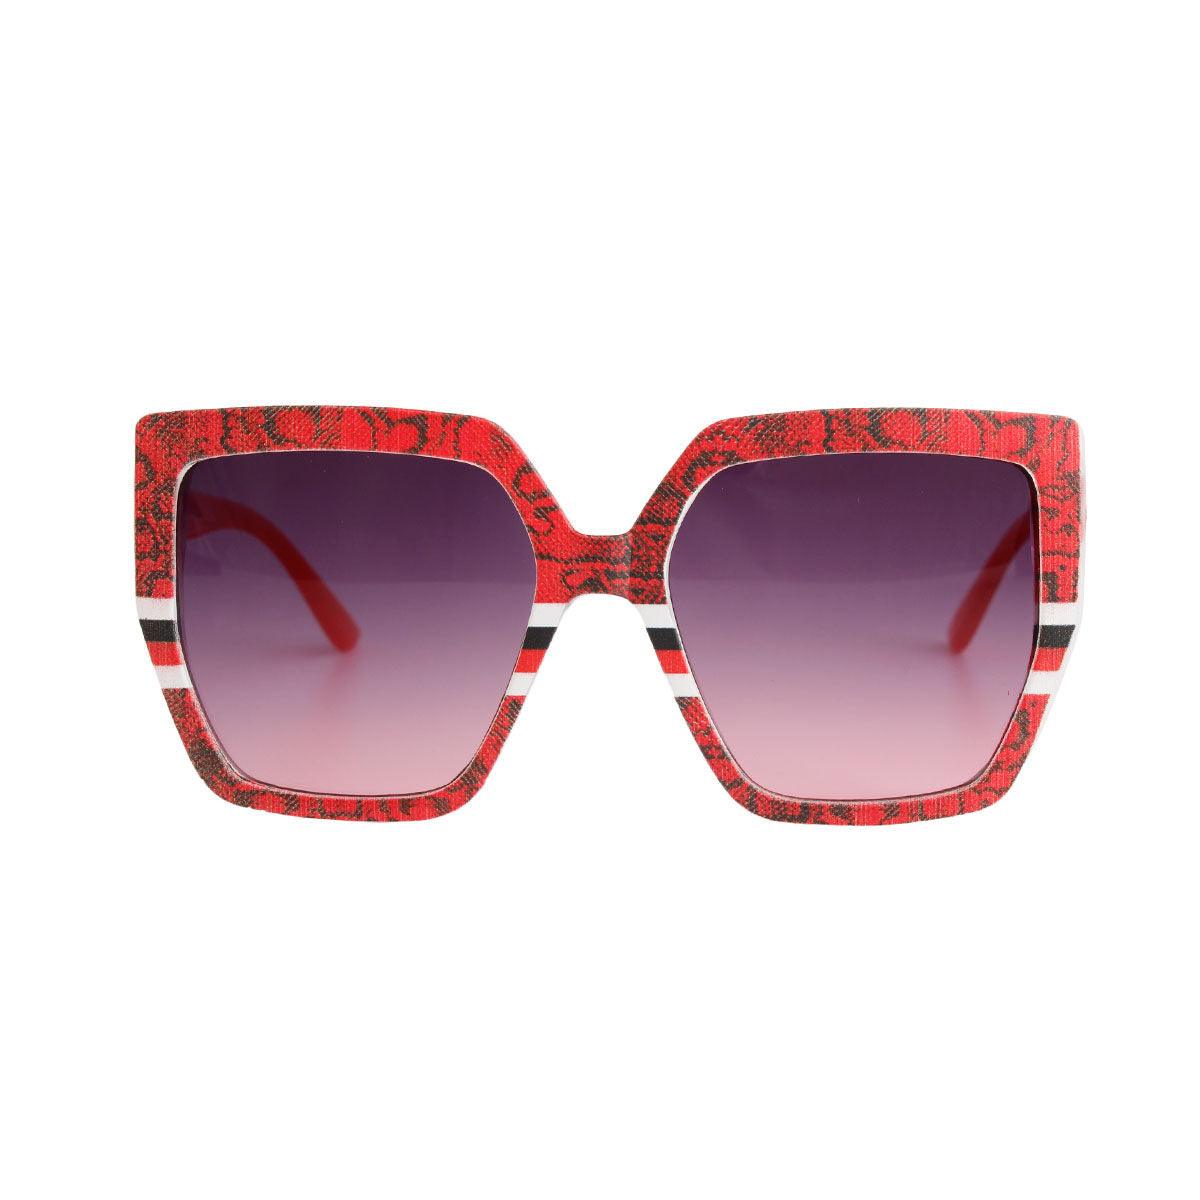 Women's Red Snake Print Square Sunglasses - Top Trendsetter Fashion Fave